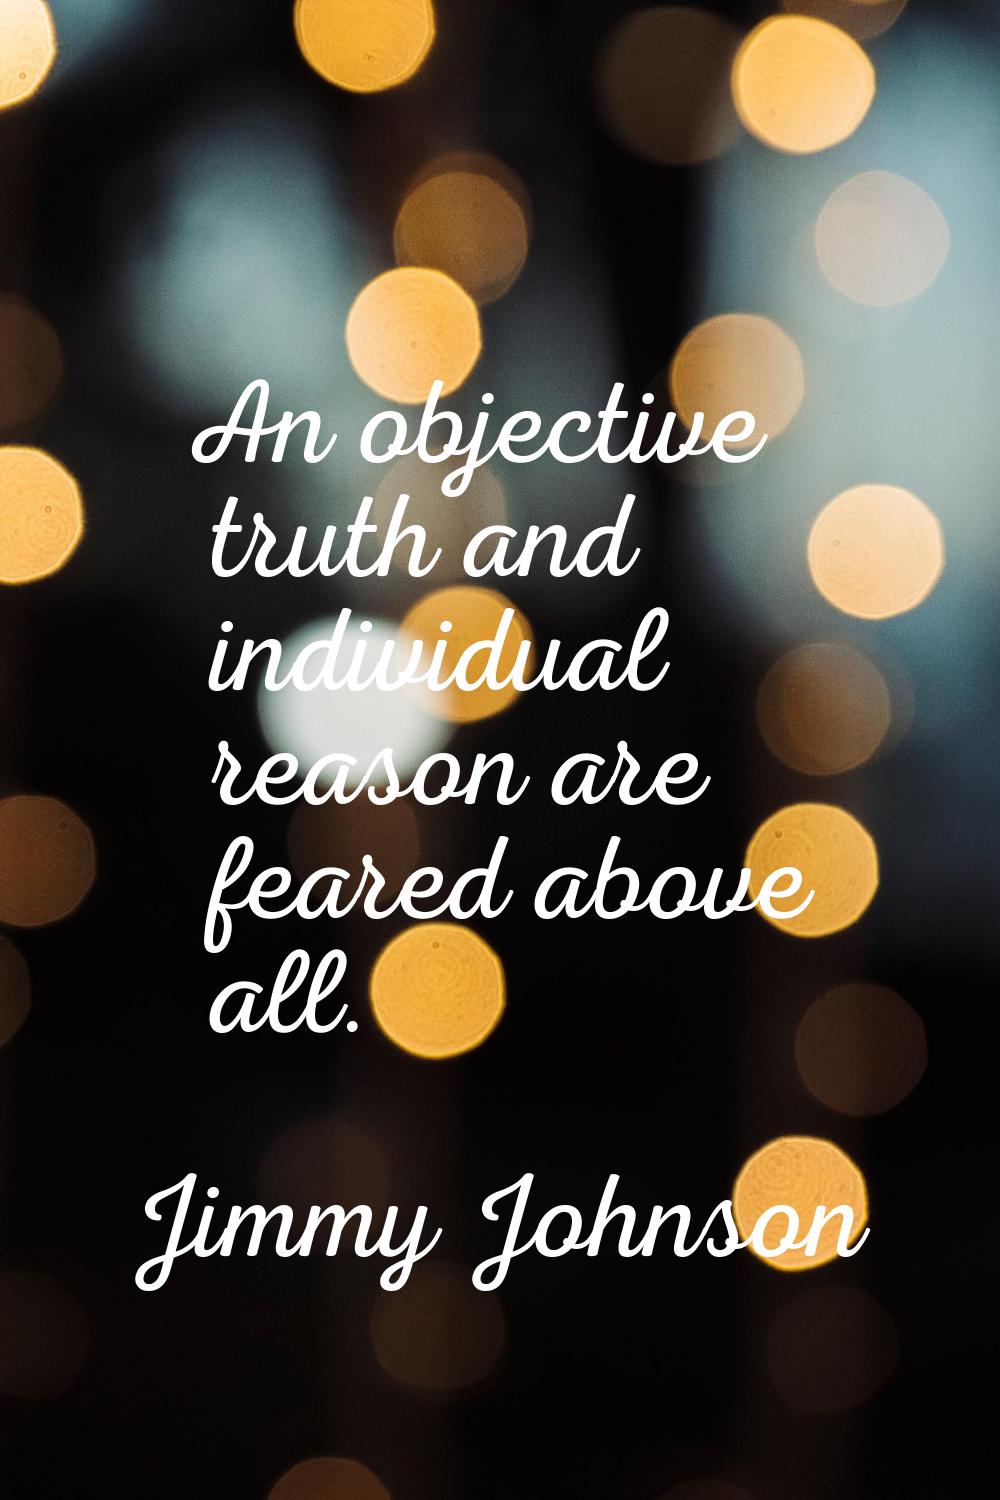 An objective truth and individual reason are feared above all.